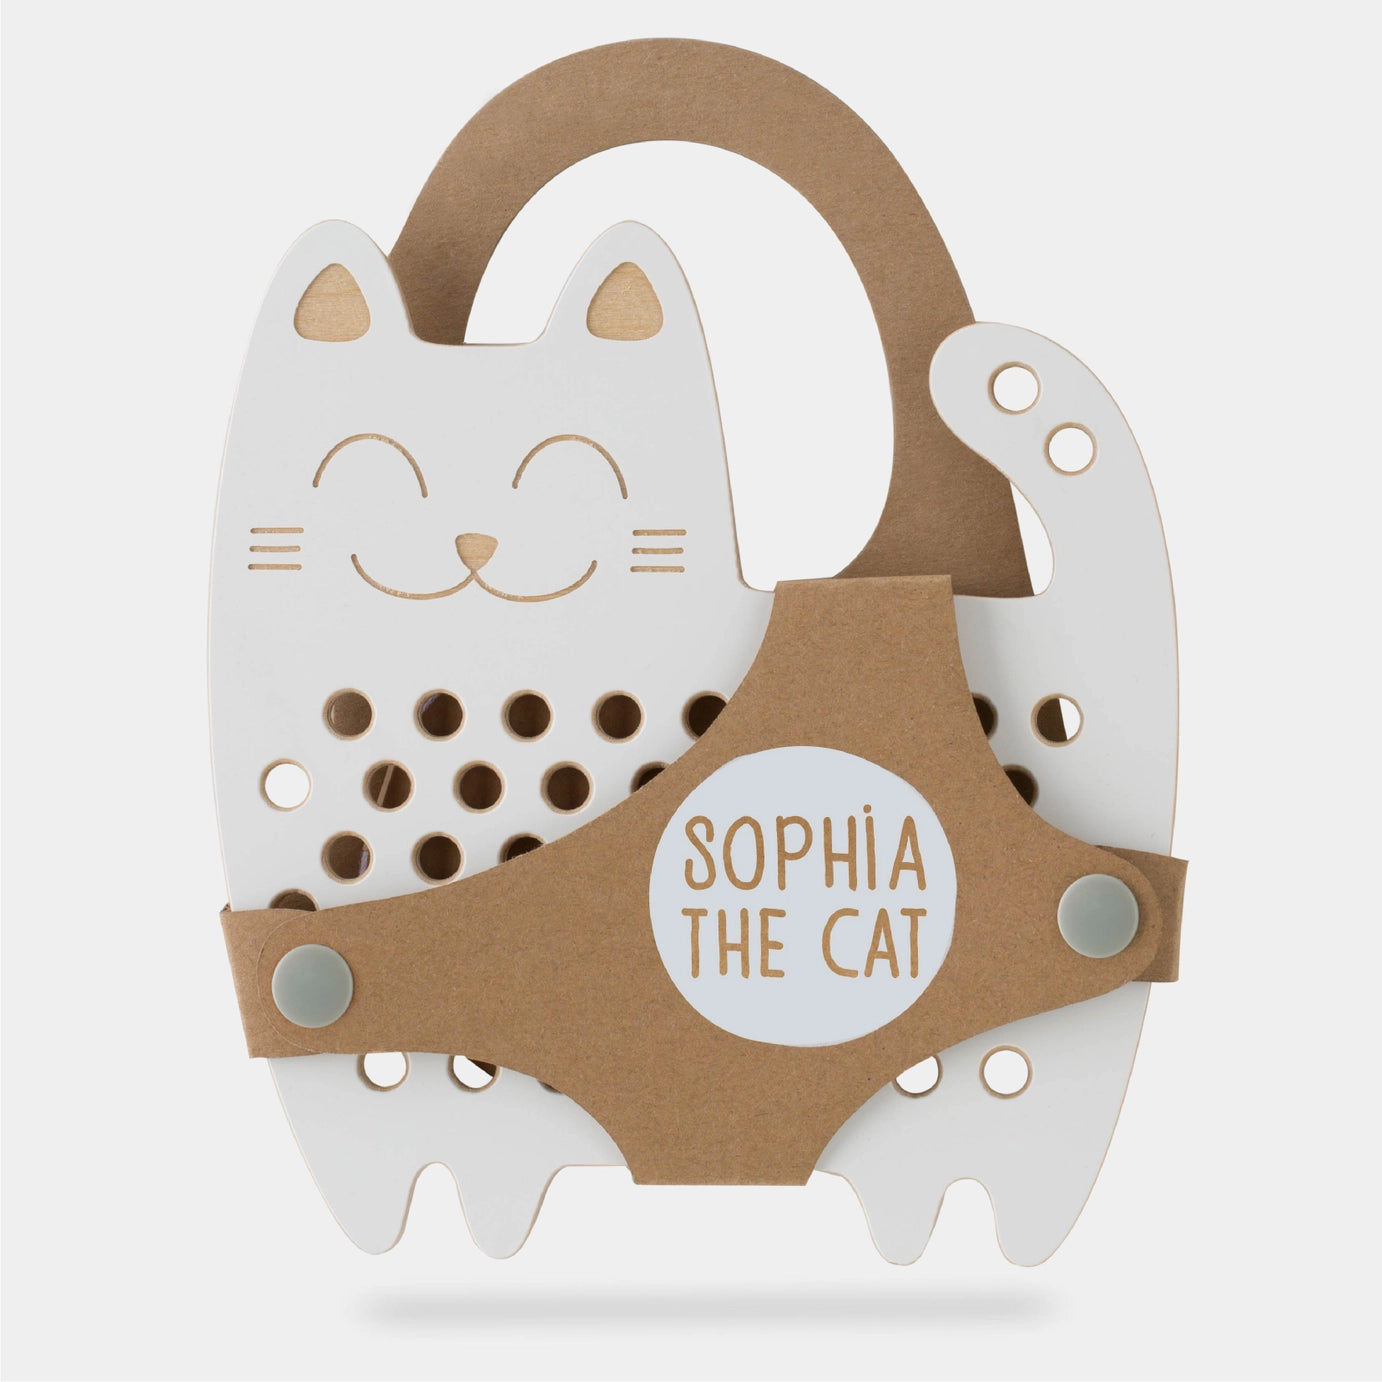 Sophia the Cat, Wooden Lacing Toy